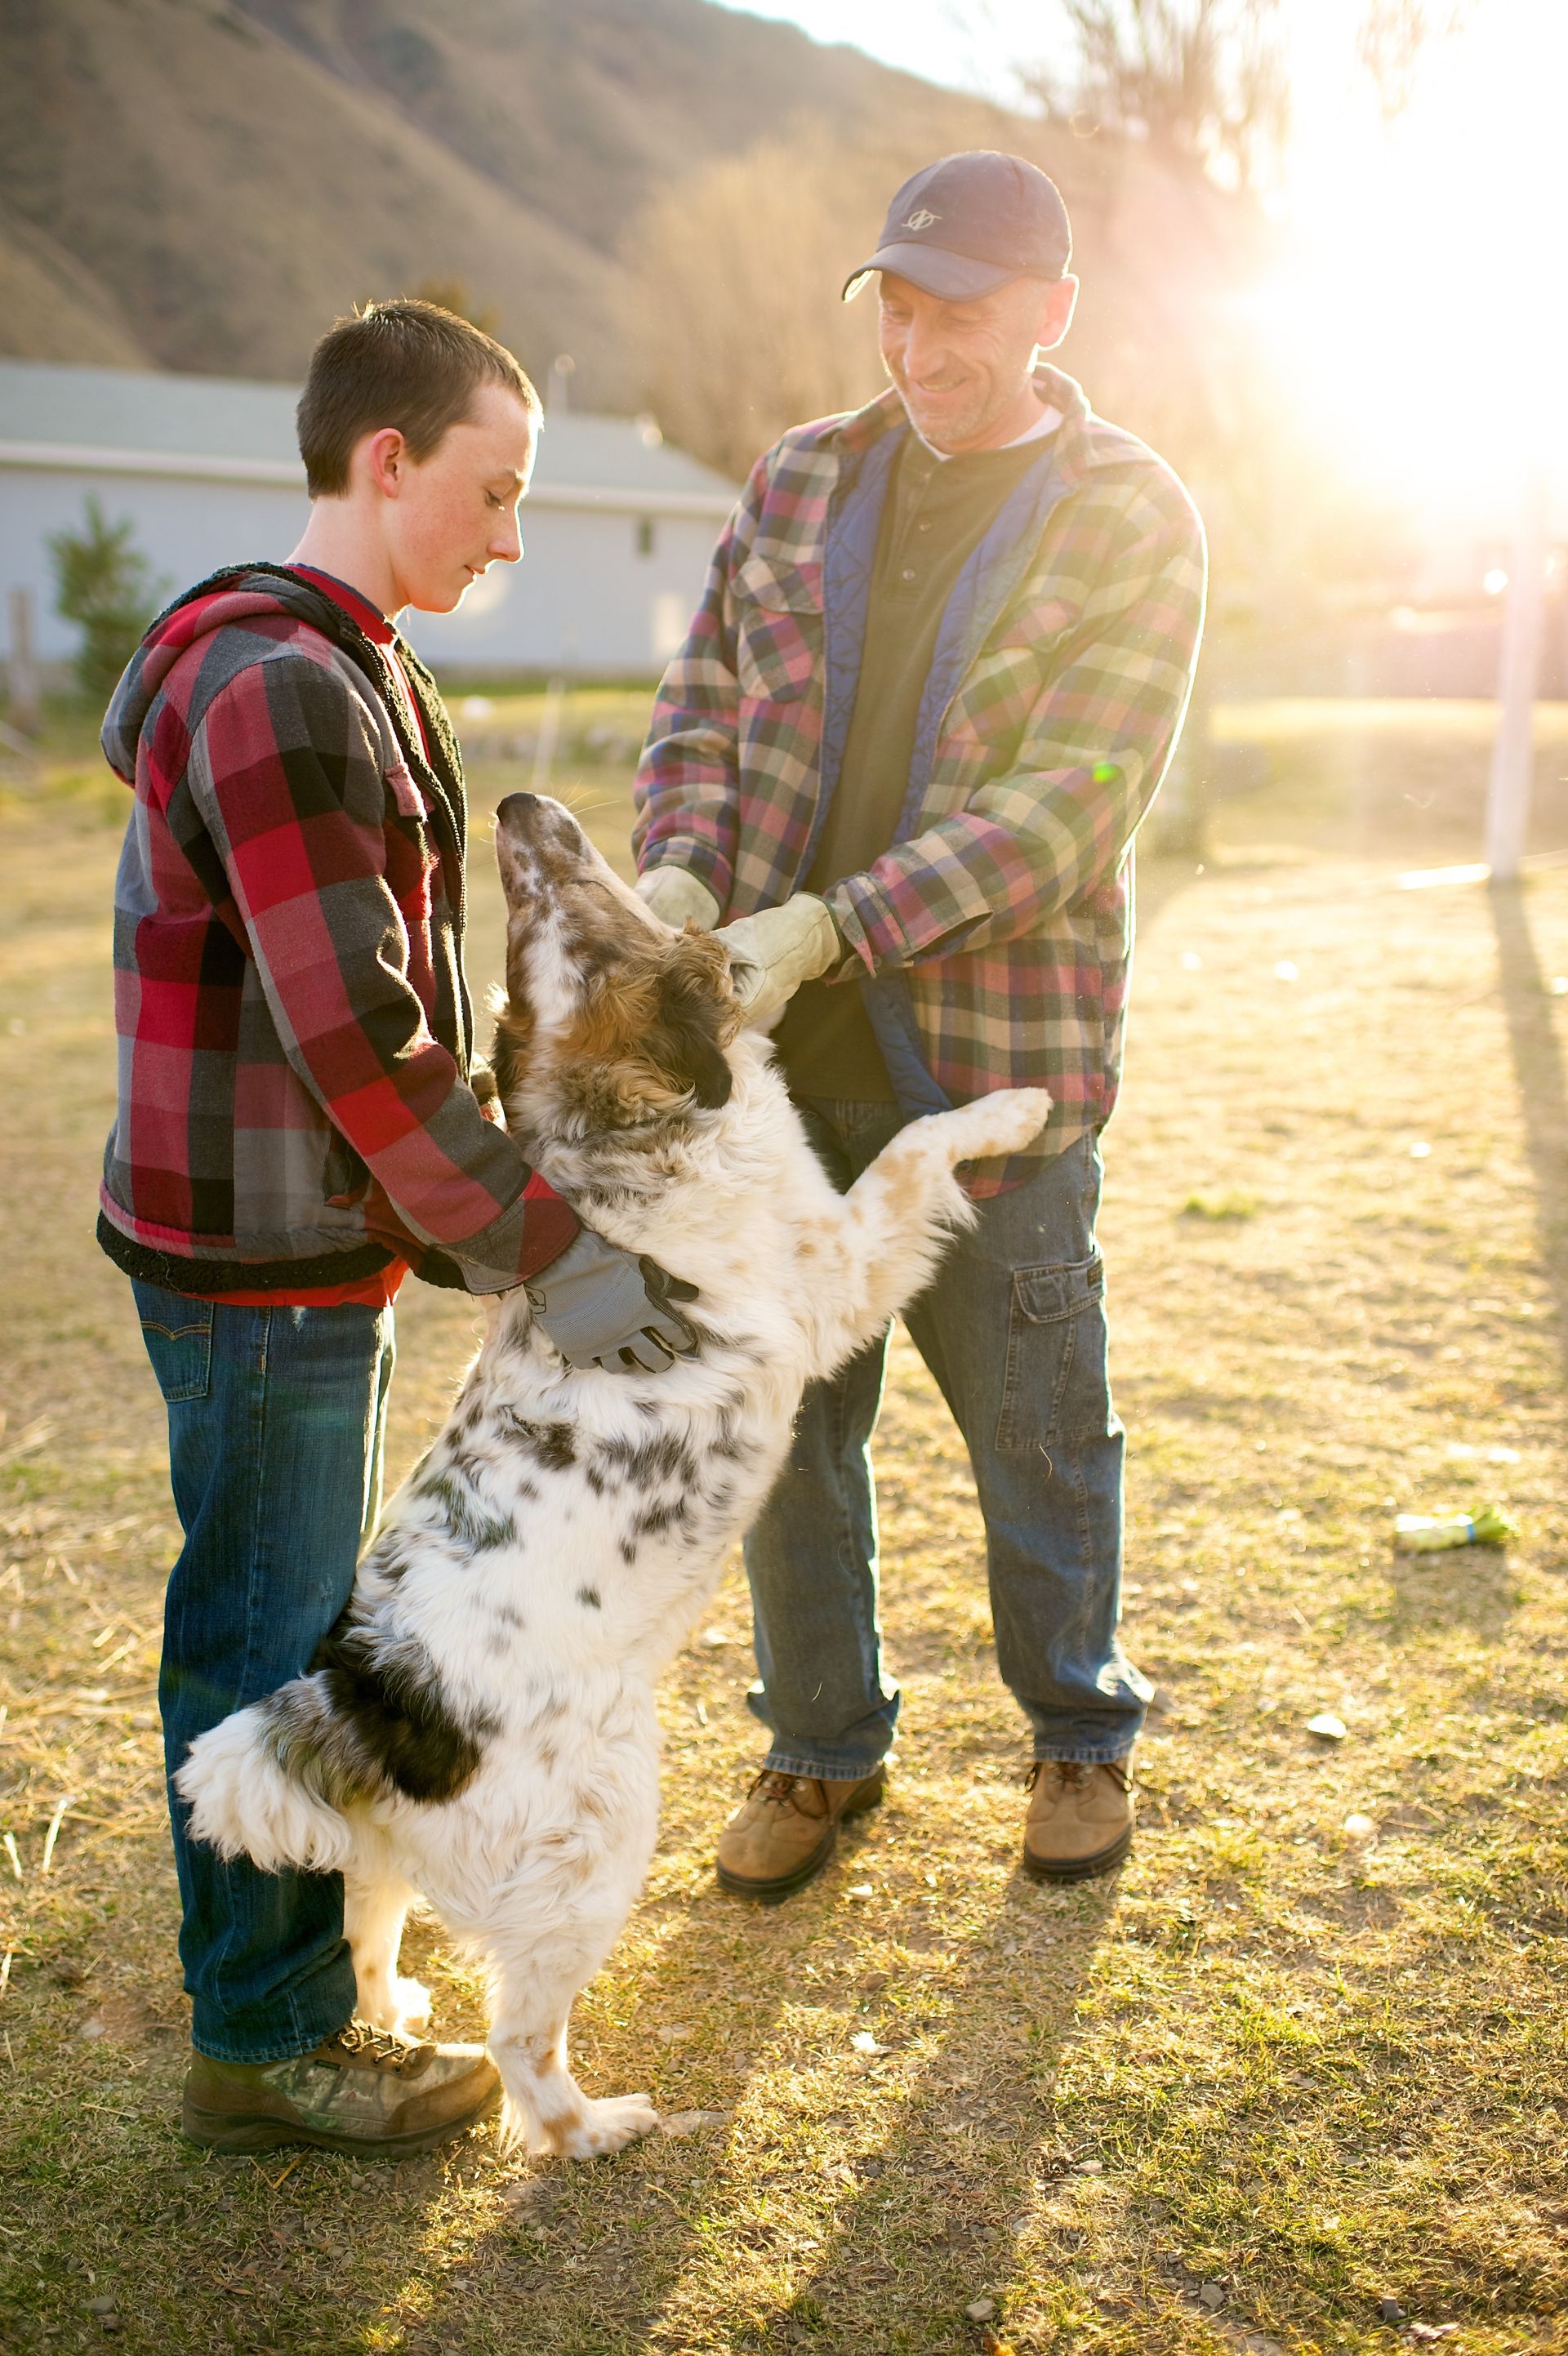 A father and son play with their dog in the yard.